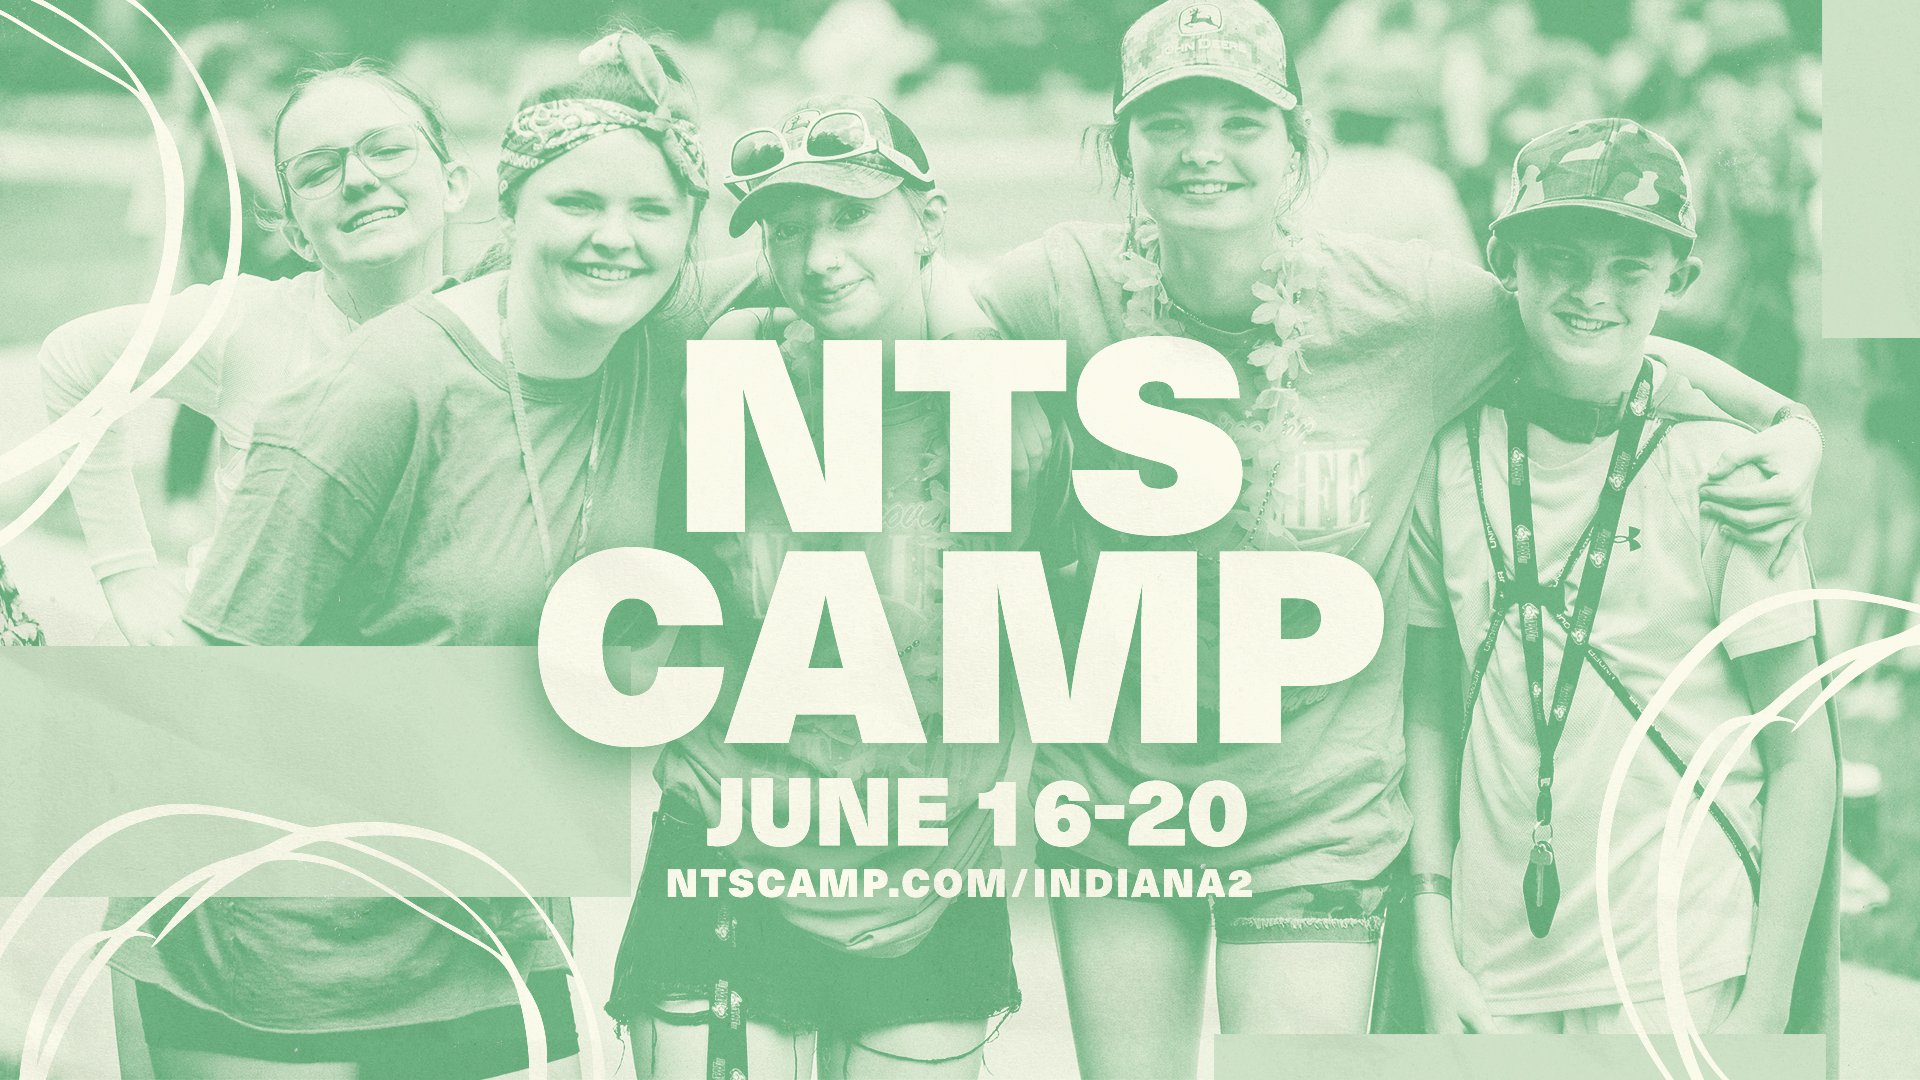 Students and parents of students! NTS camp is coming up quickly! If you haven't already signed up for camp, do so soon! NTS is a lifechanging, powerful, and FUN week for our students. The price of camp goes up on 5/5, so to get the lowest price possi